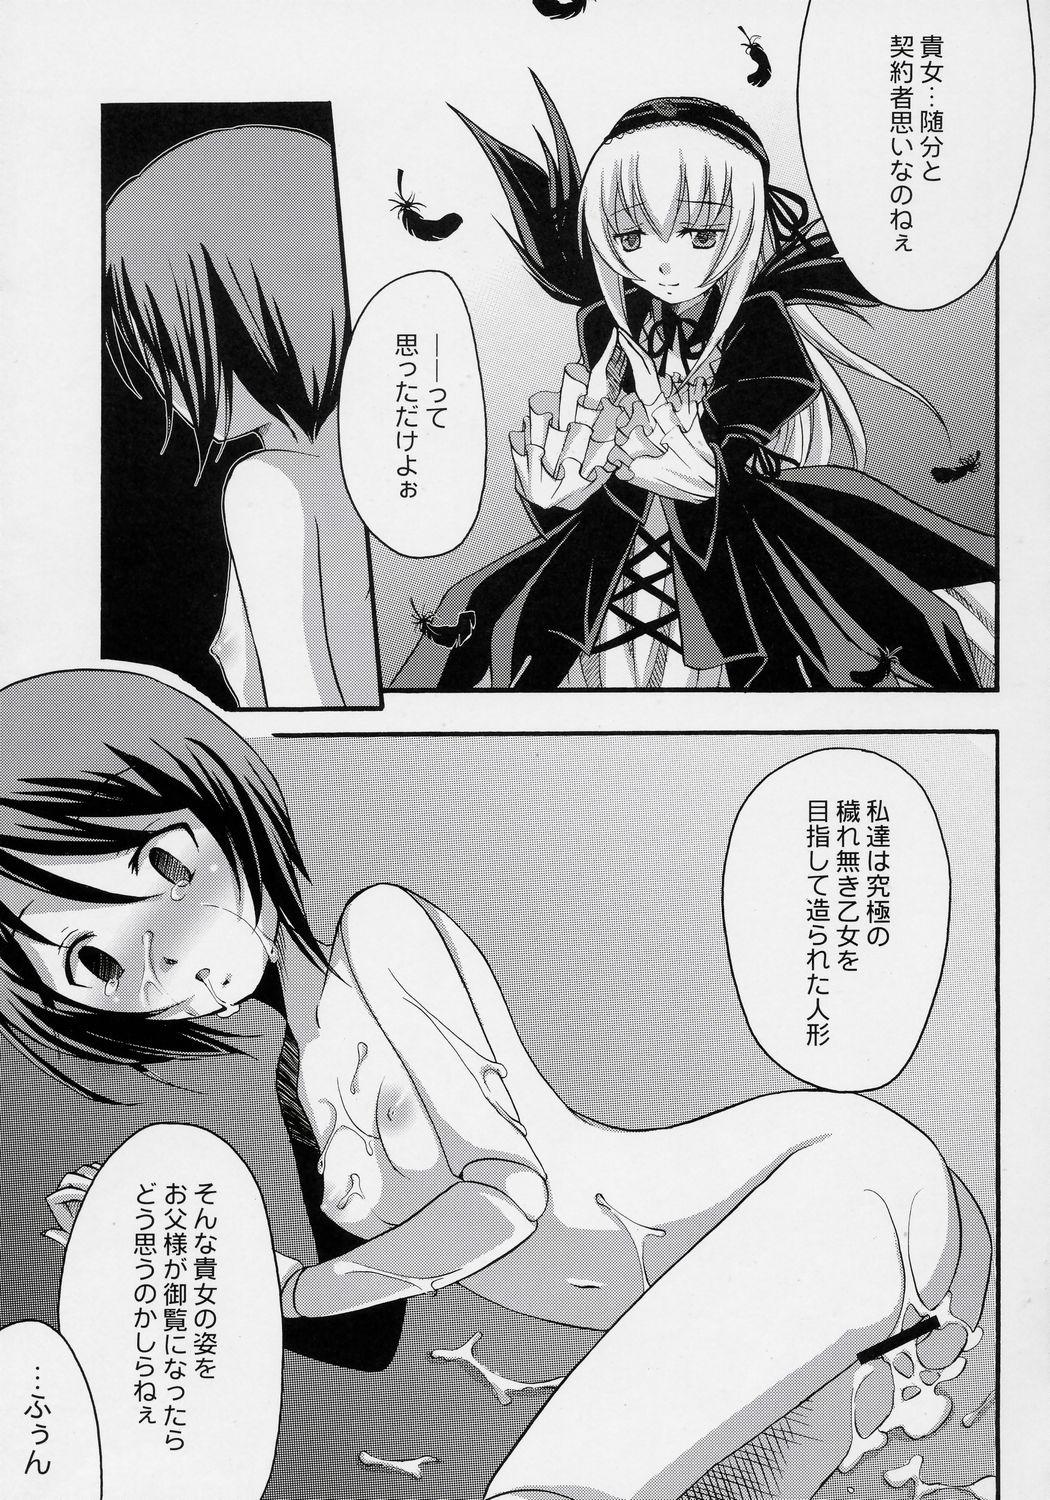 Classy Ginshi no Ami - Rozen maiden Top - Page 10